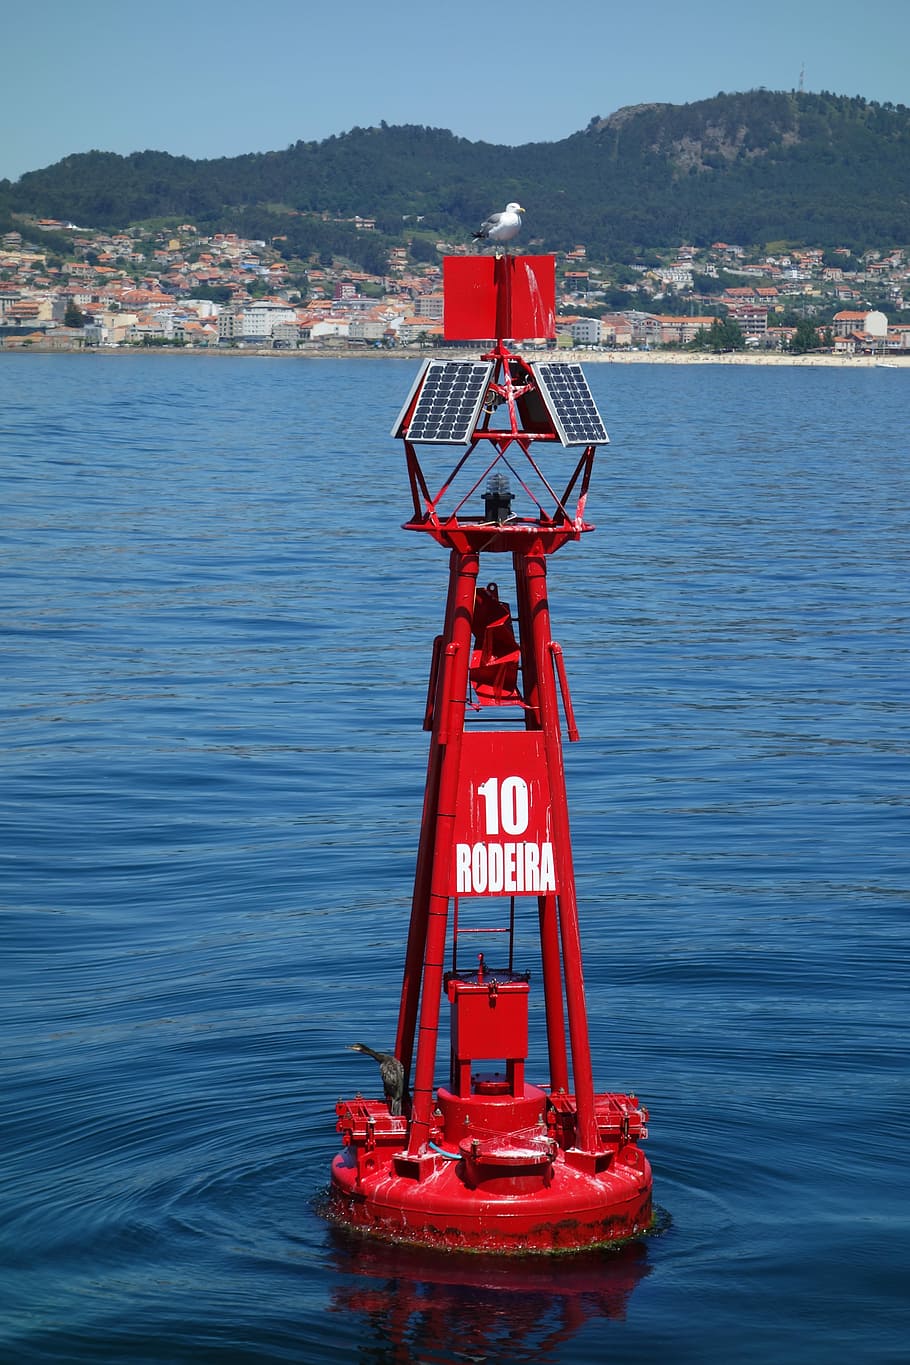 Buoy, Signaling, Ria, Sea, safety, red, water, rescue, protection, nature